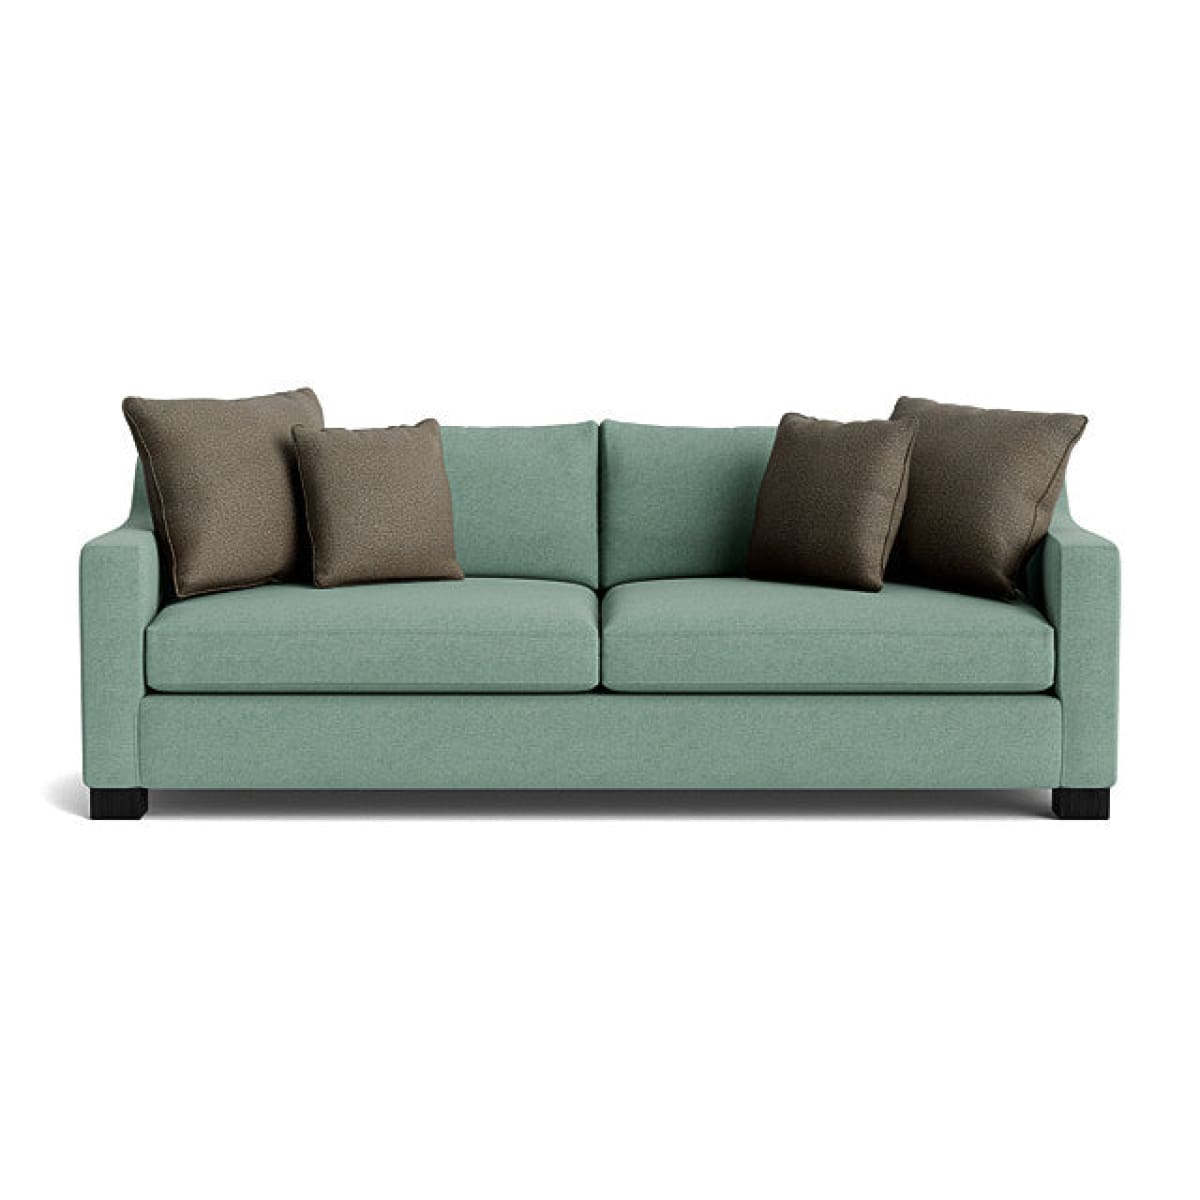 Ewing Sofa - Sectional - Entice Dew